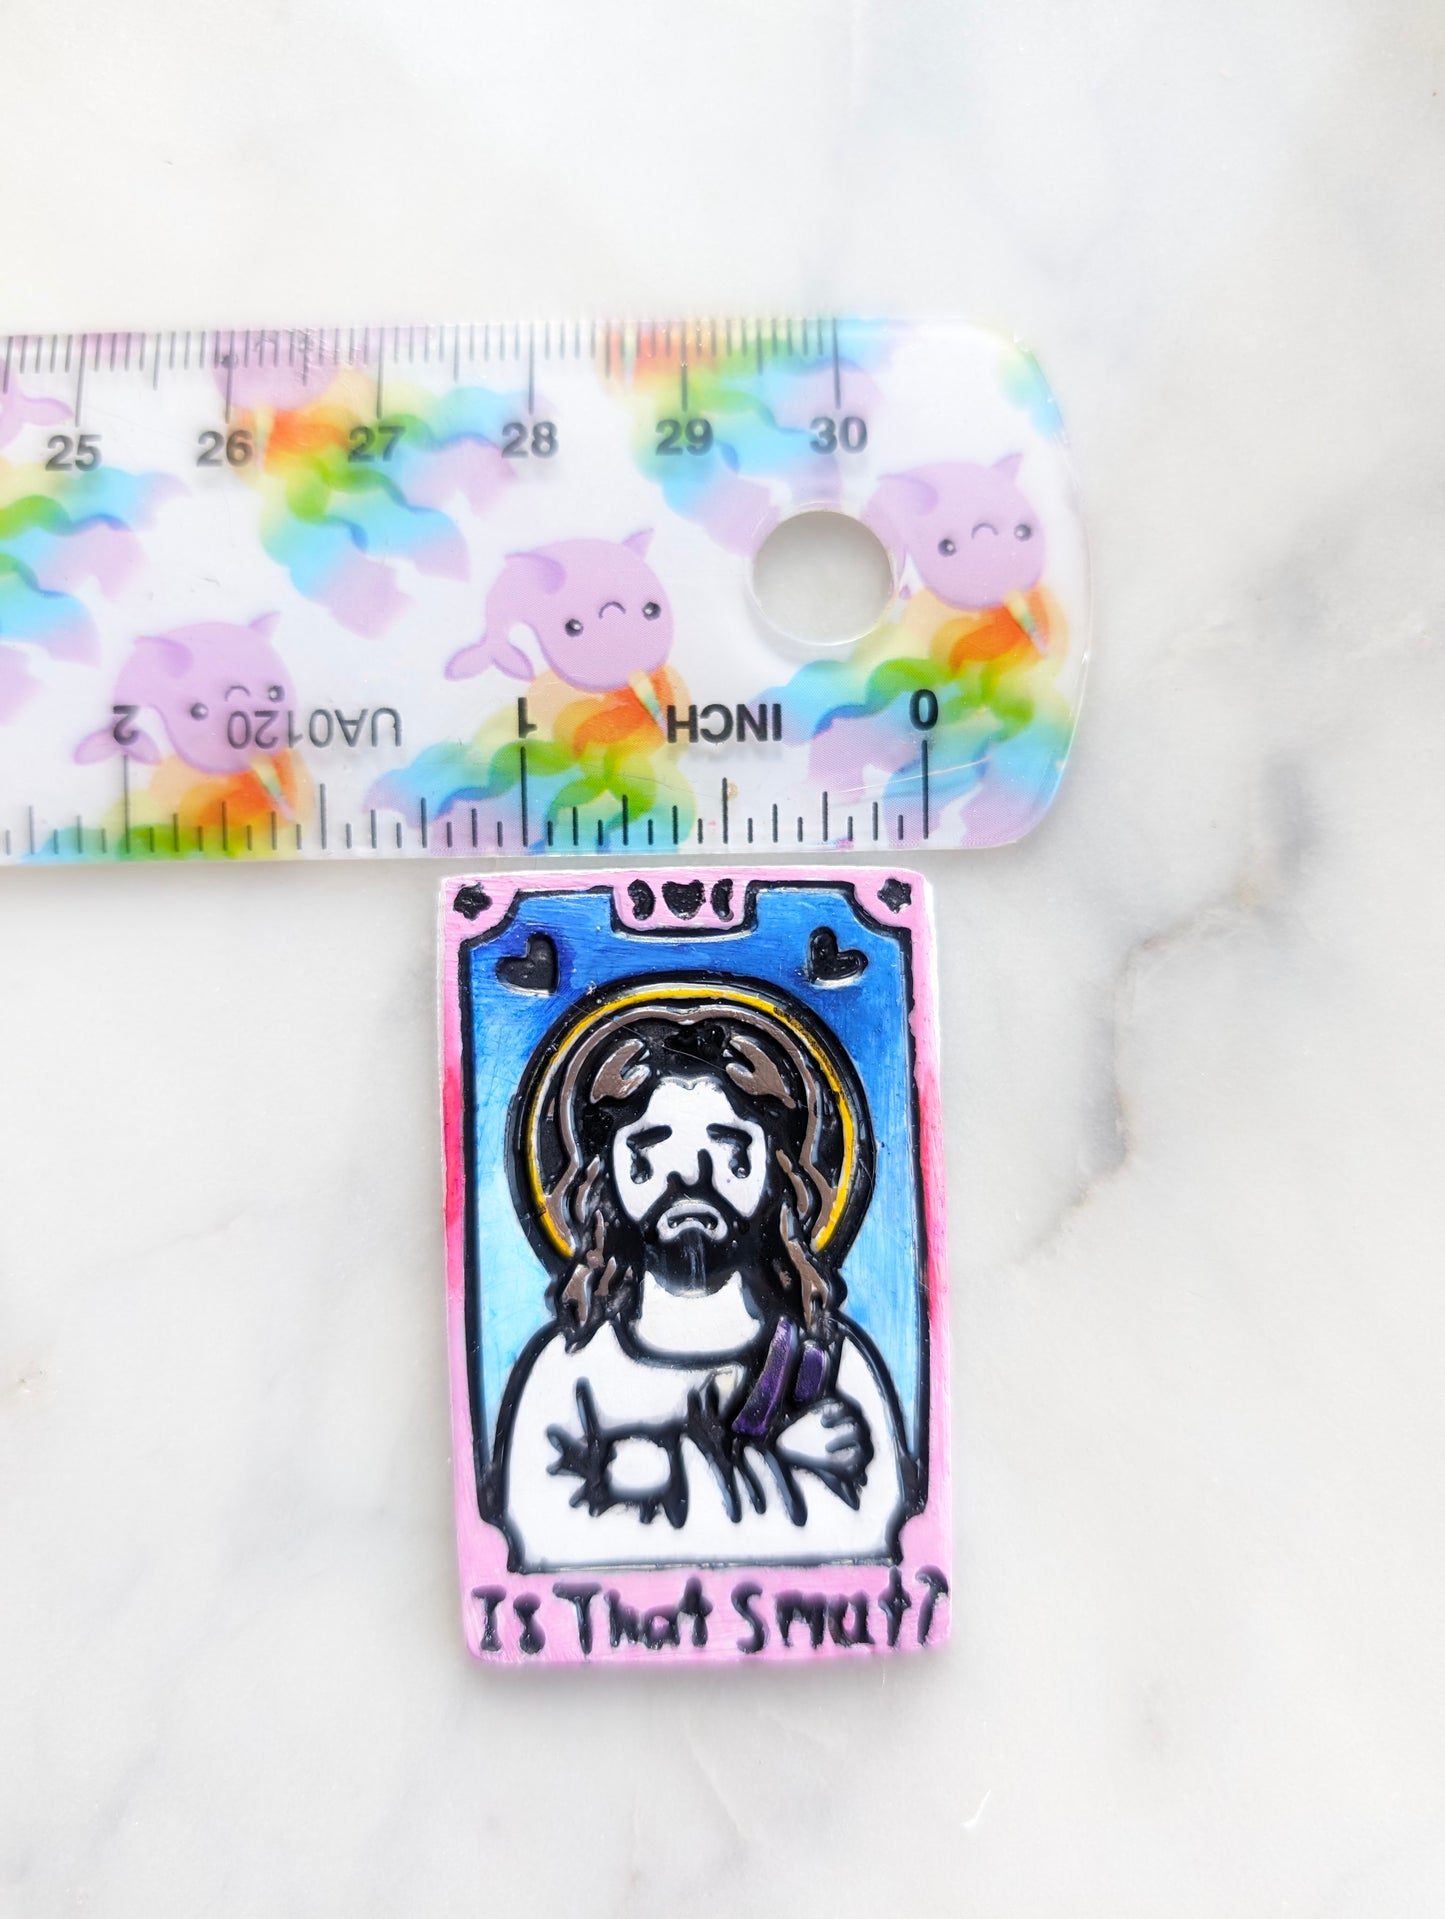 Earring Card of Jesus "Is That Smut" Sharp Clay Cutter